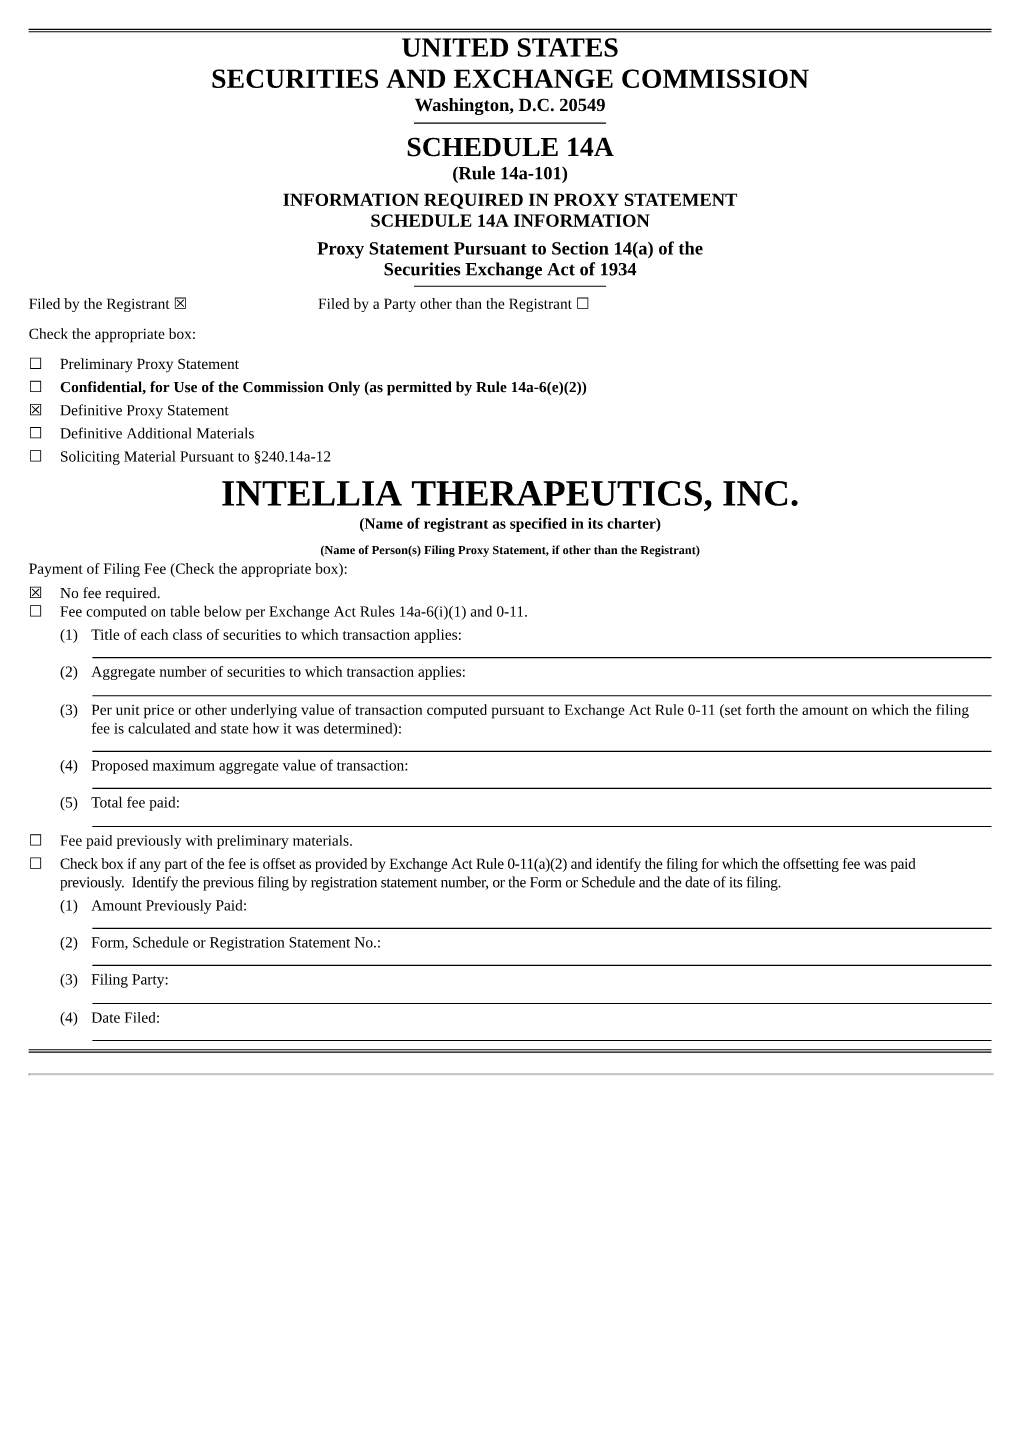 INTELLIA THERAPEUTICS, INC. (Name of Registrant As Specified in Its Charter)